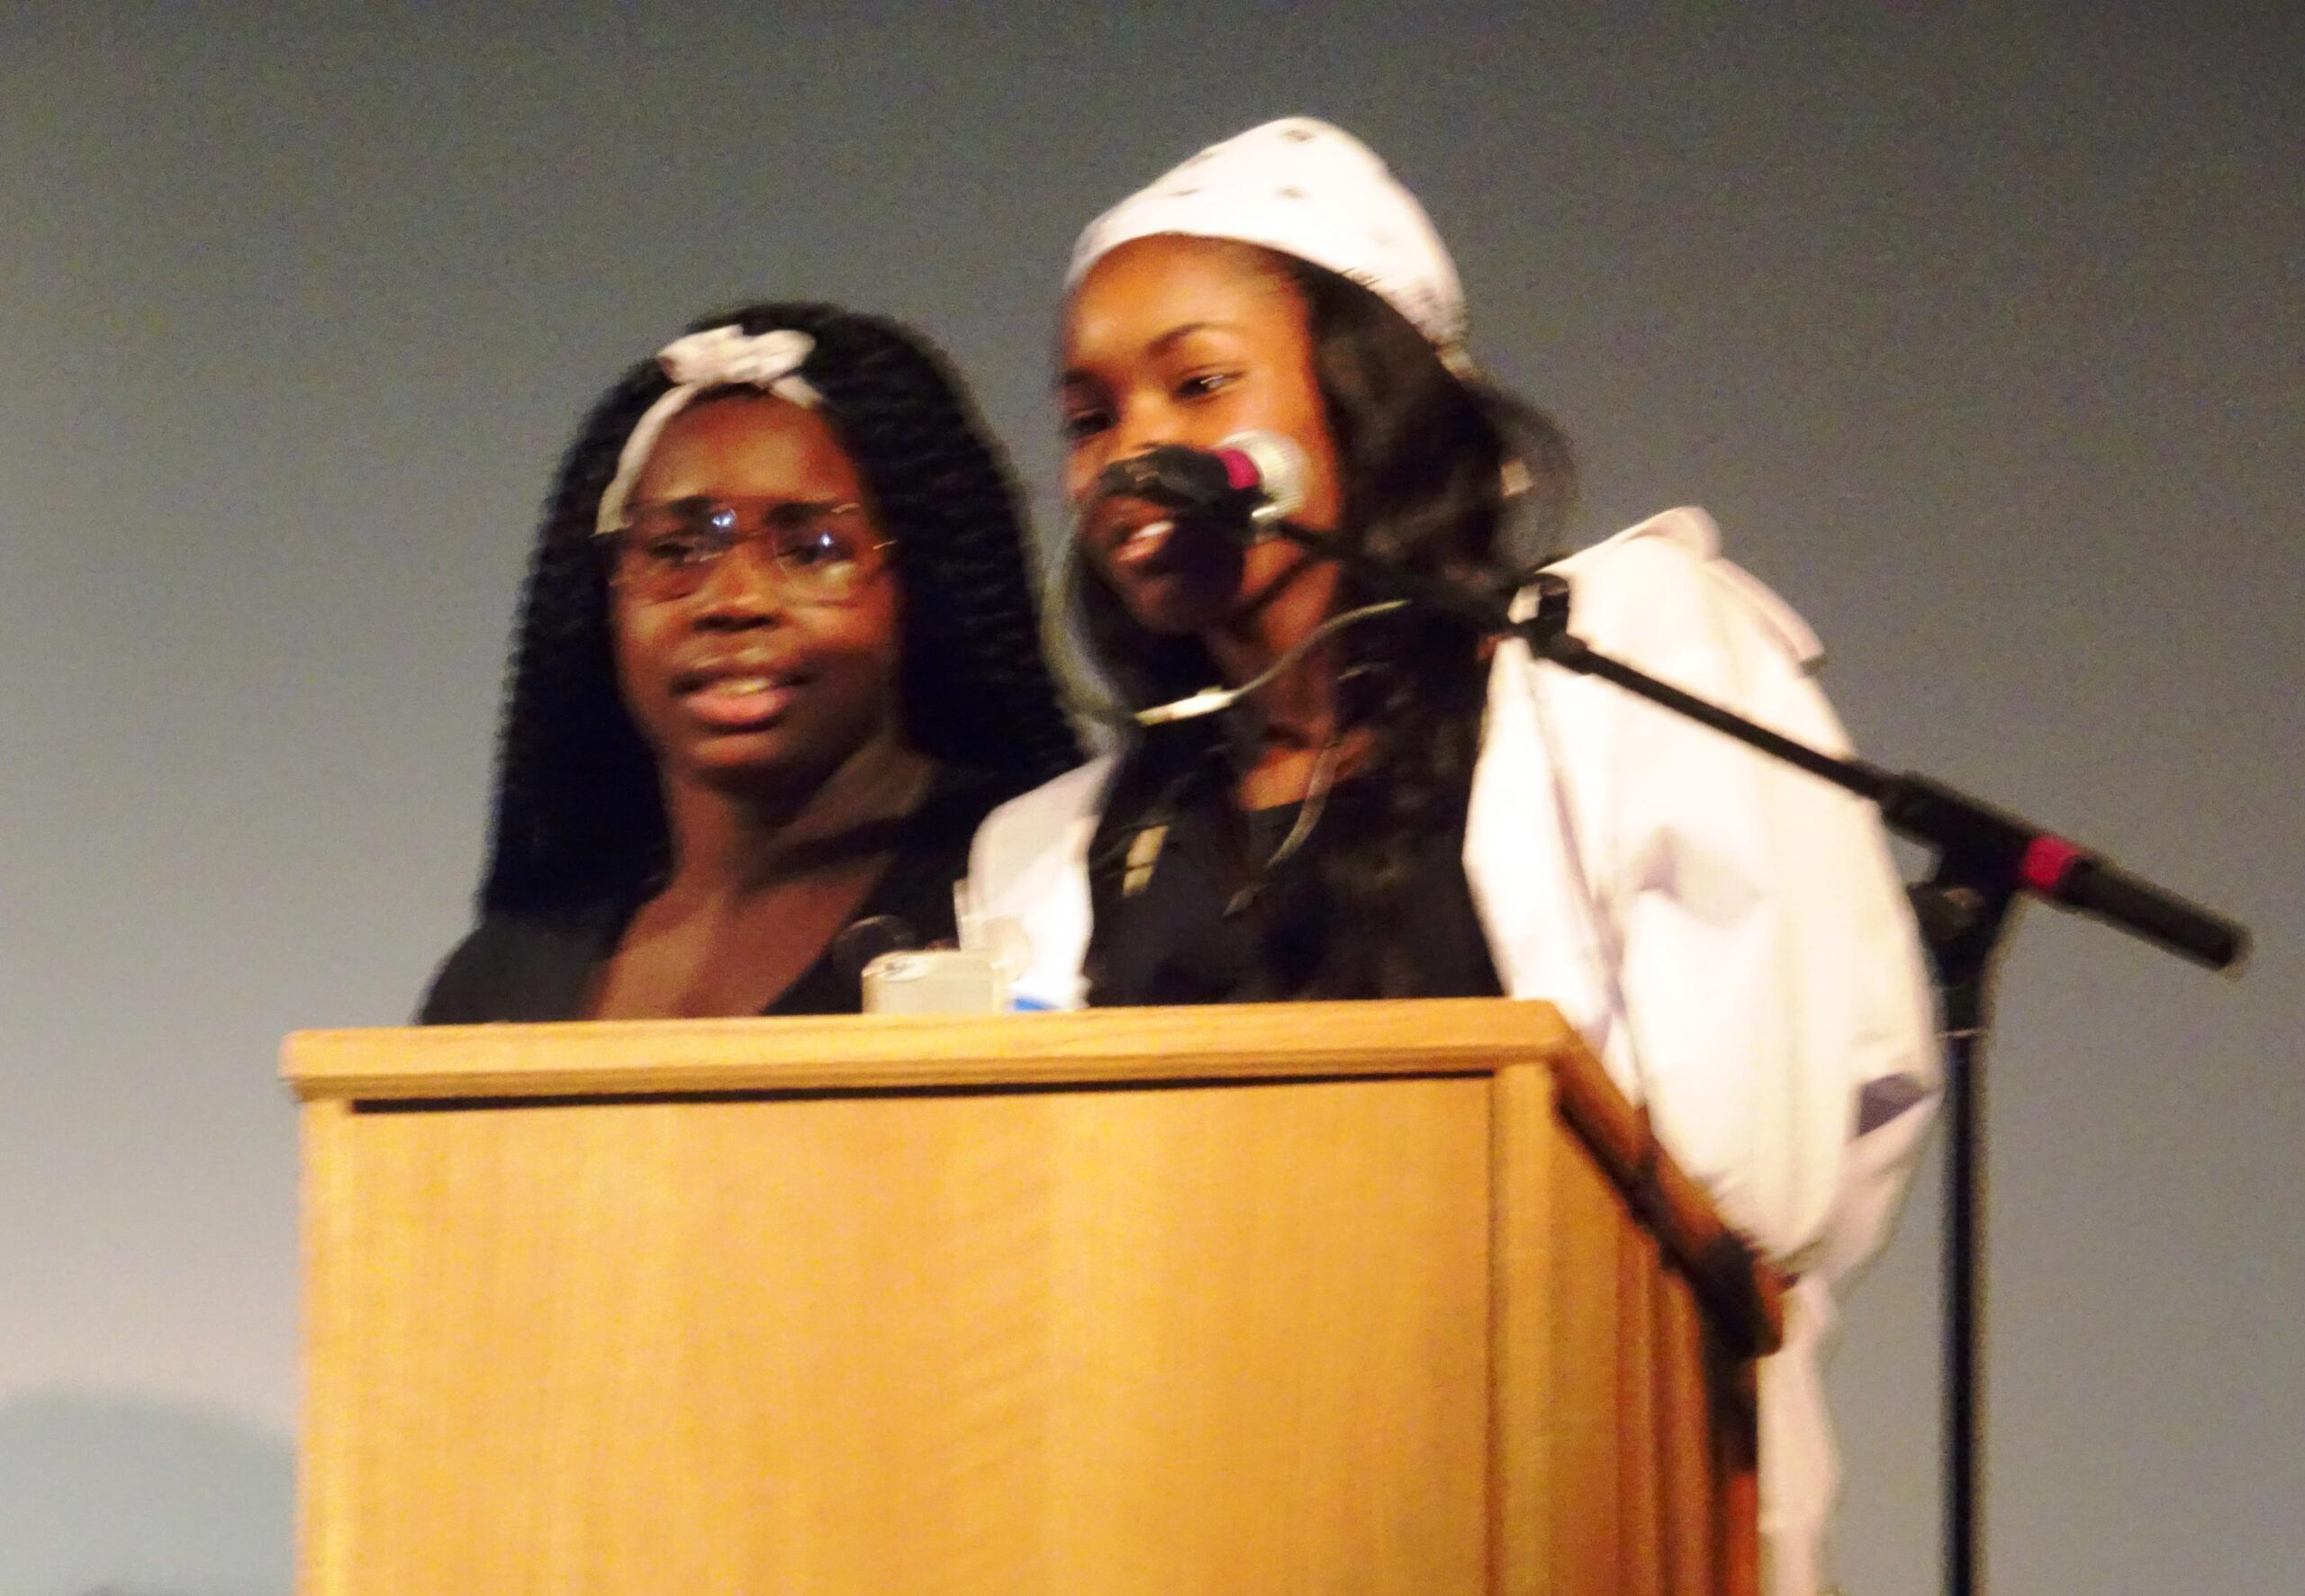 Ryaah Wyatt and Krystyn Jones of Trend N Topic accept the award for R & B Group of the Year